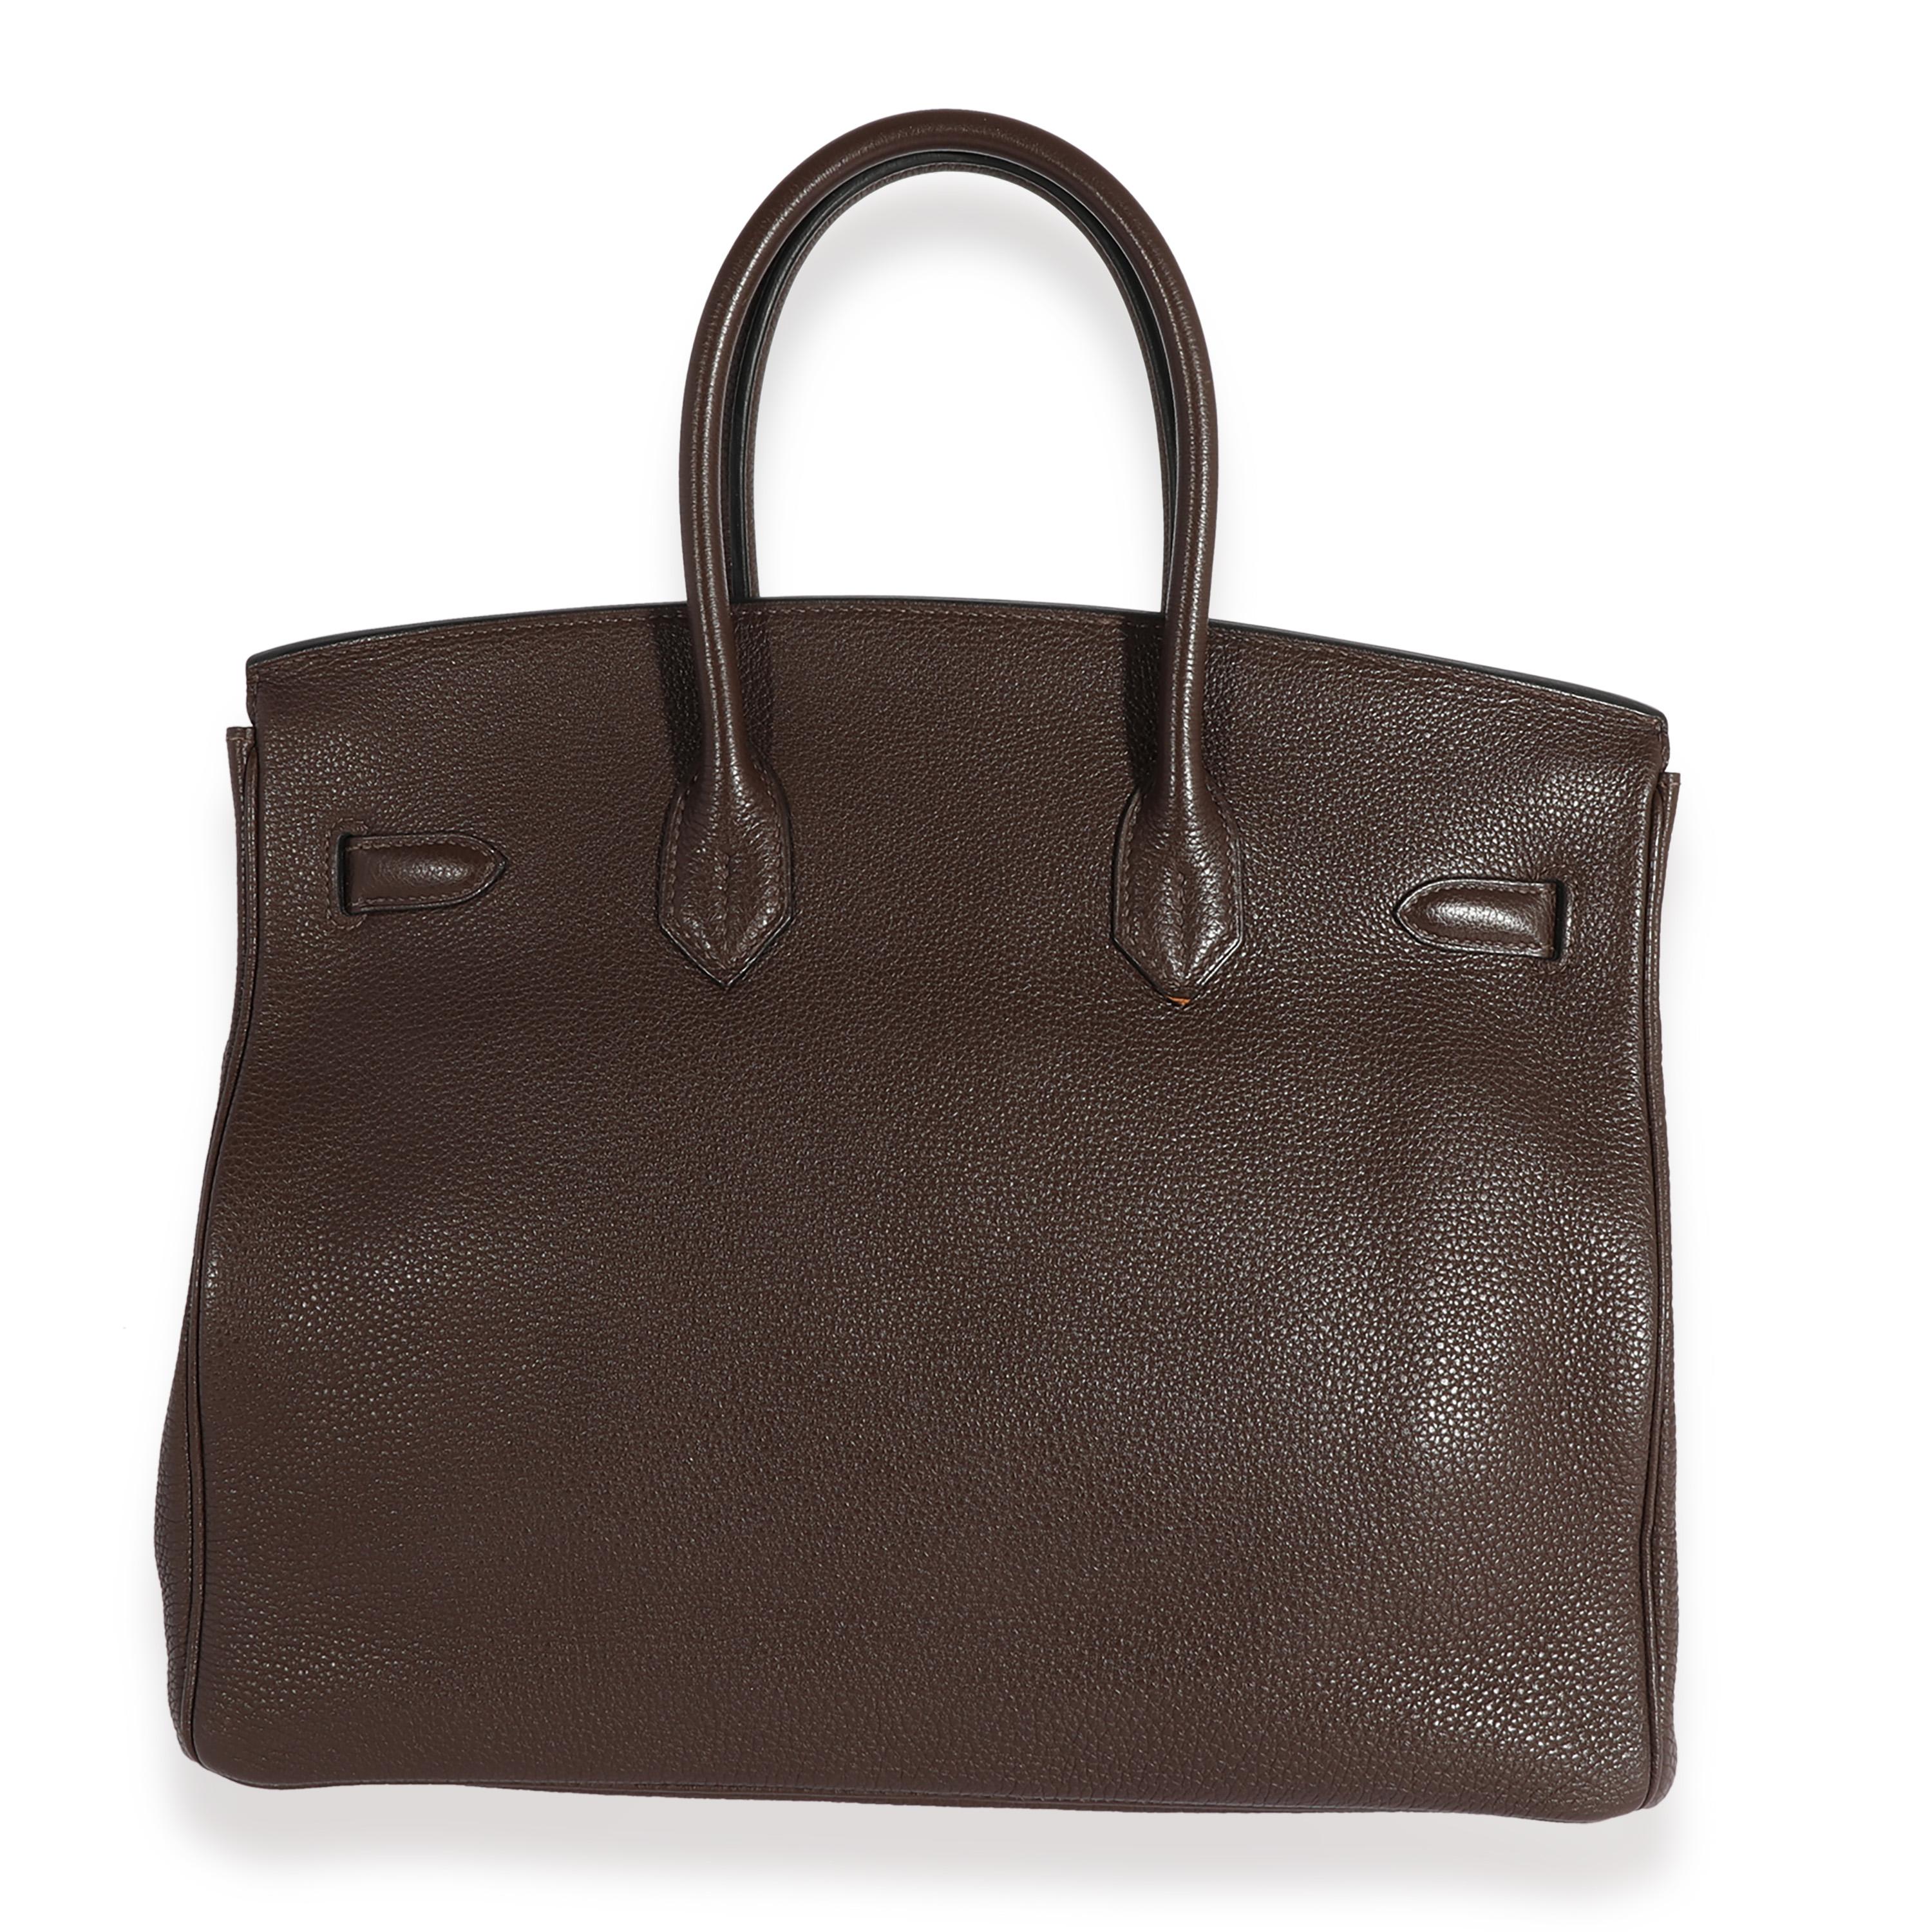 Listing Title: Hermès Chocolat Togo Birkin 35 PHW
SKU: 124235
Condition: Pre-owned 
Handbag Condition: Very Good
Condition Comments: Very Good Condition. Exterior peeling at leather and faint scuffing. Faint scratching at hardware. Interior scuffing